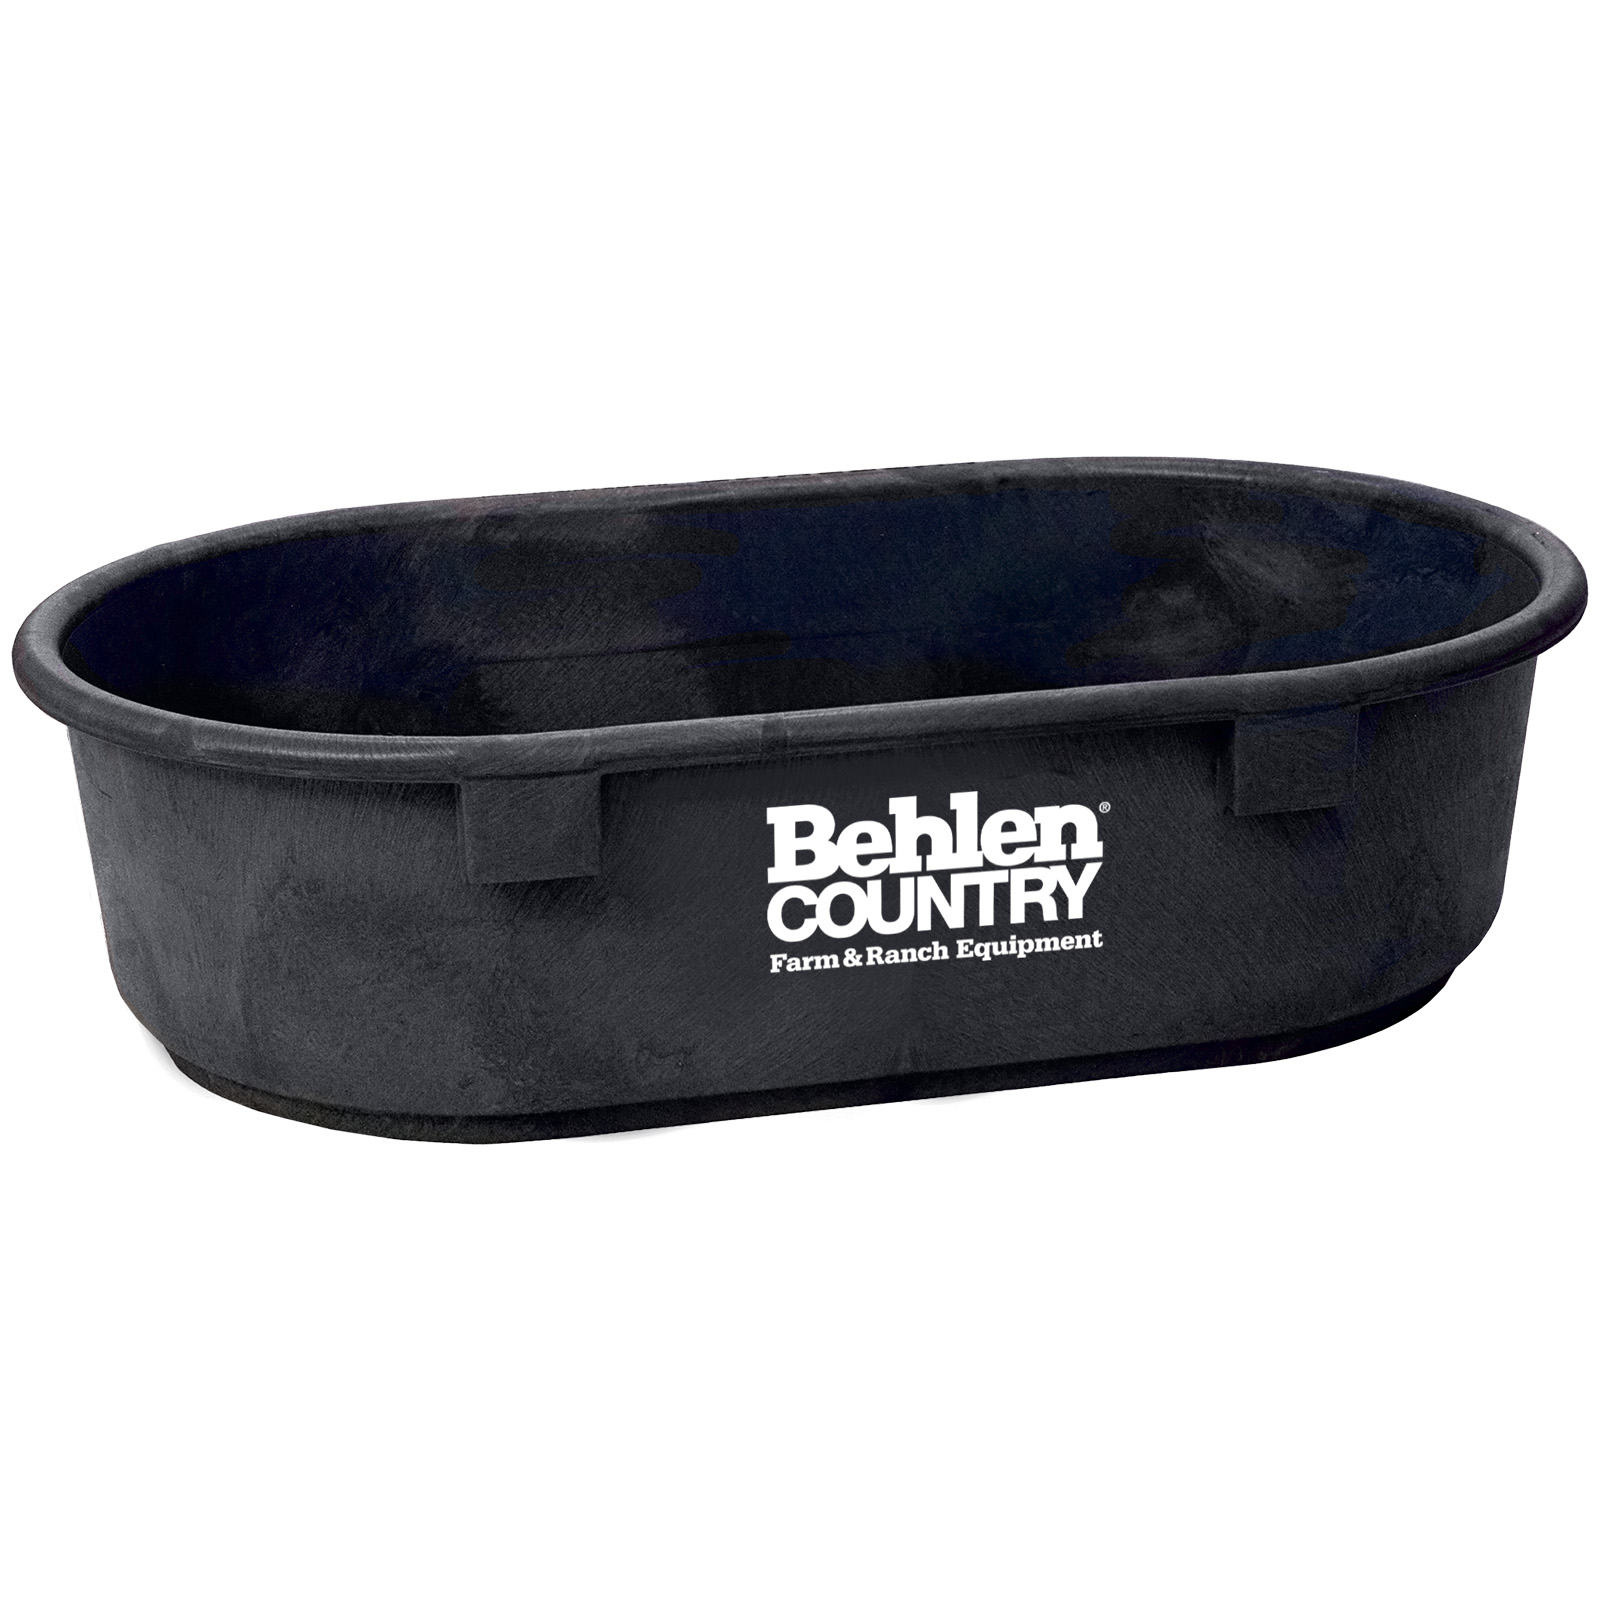 Behlen Country 50 Gallon Utility Tank with Handles - 50140018